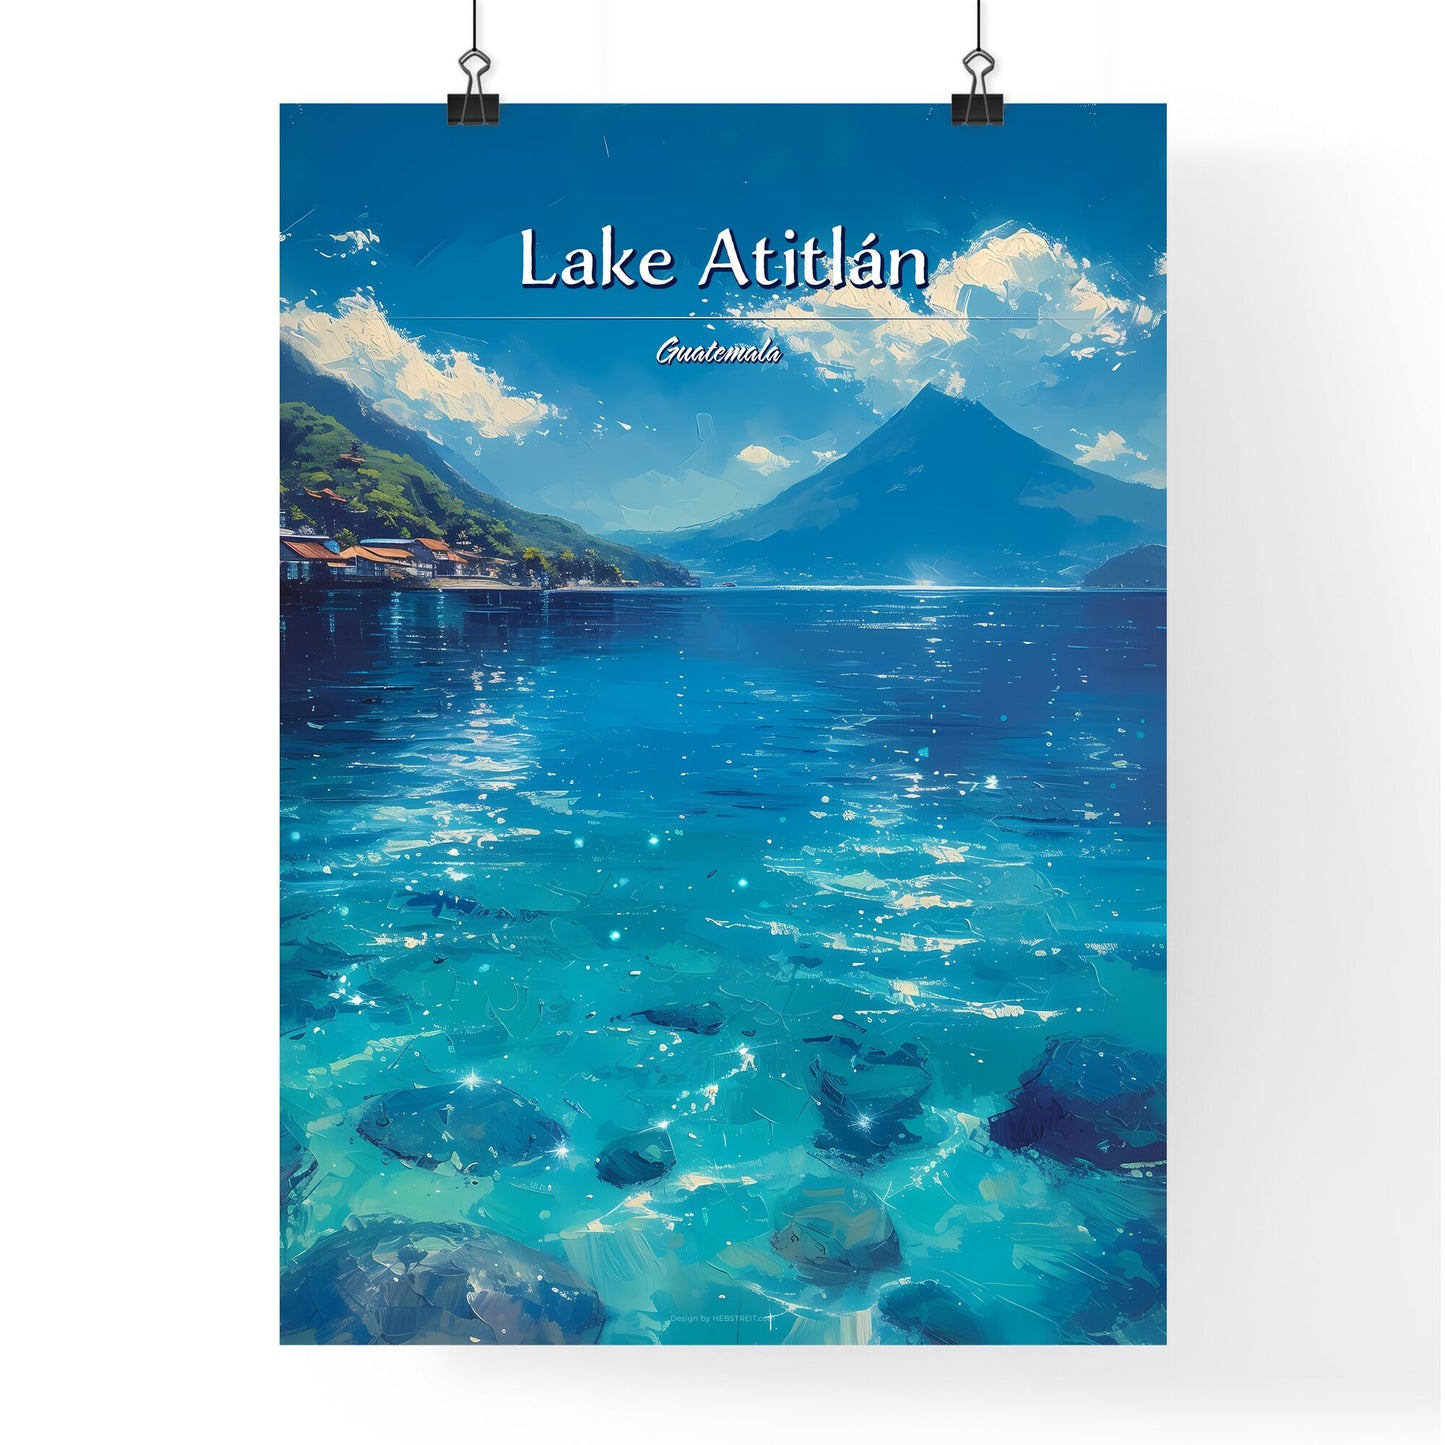 Lake Atitlán, Guatemala - Art print of a body of water with mountains and houses Default Title